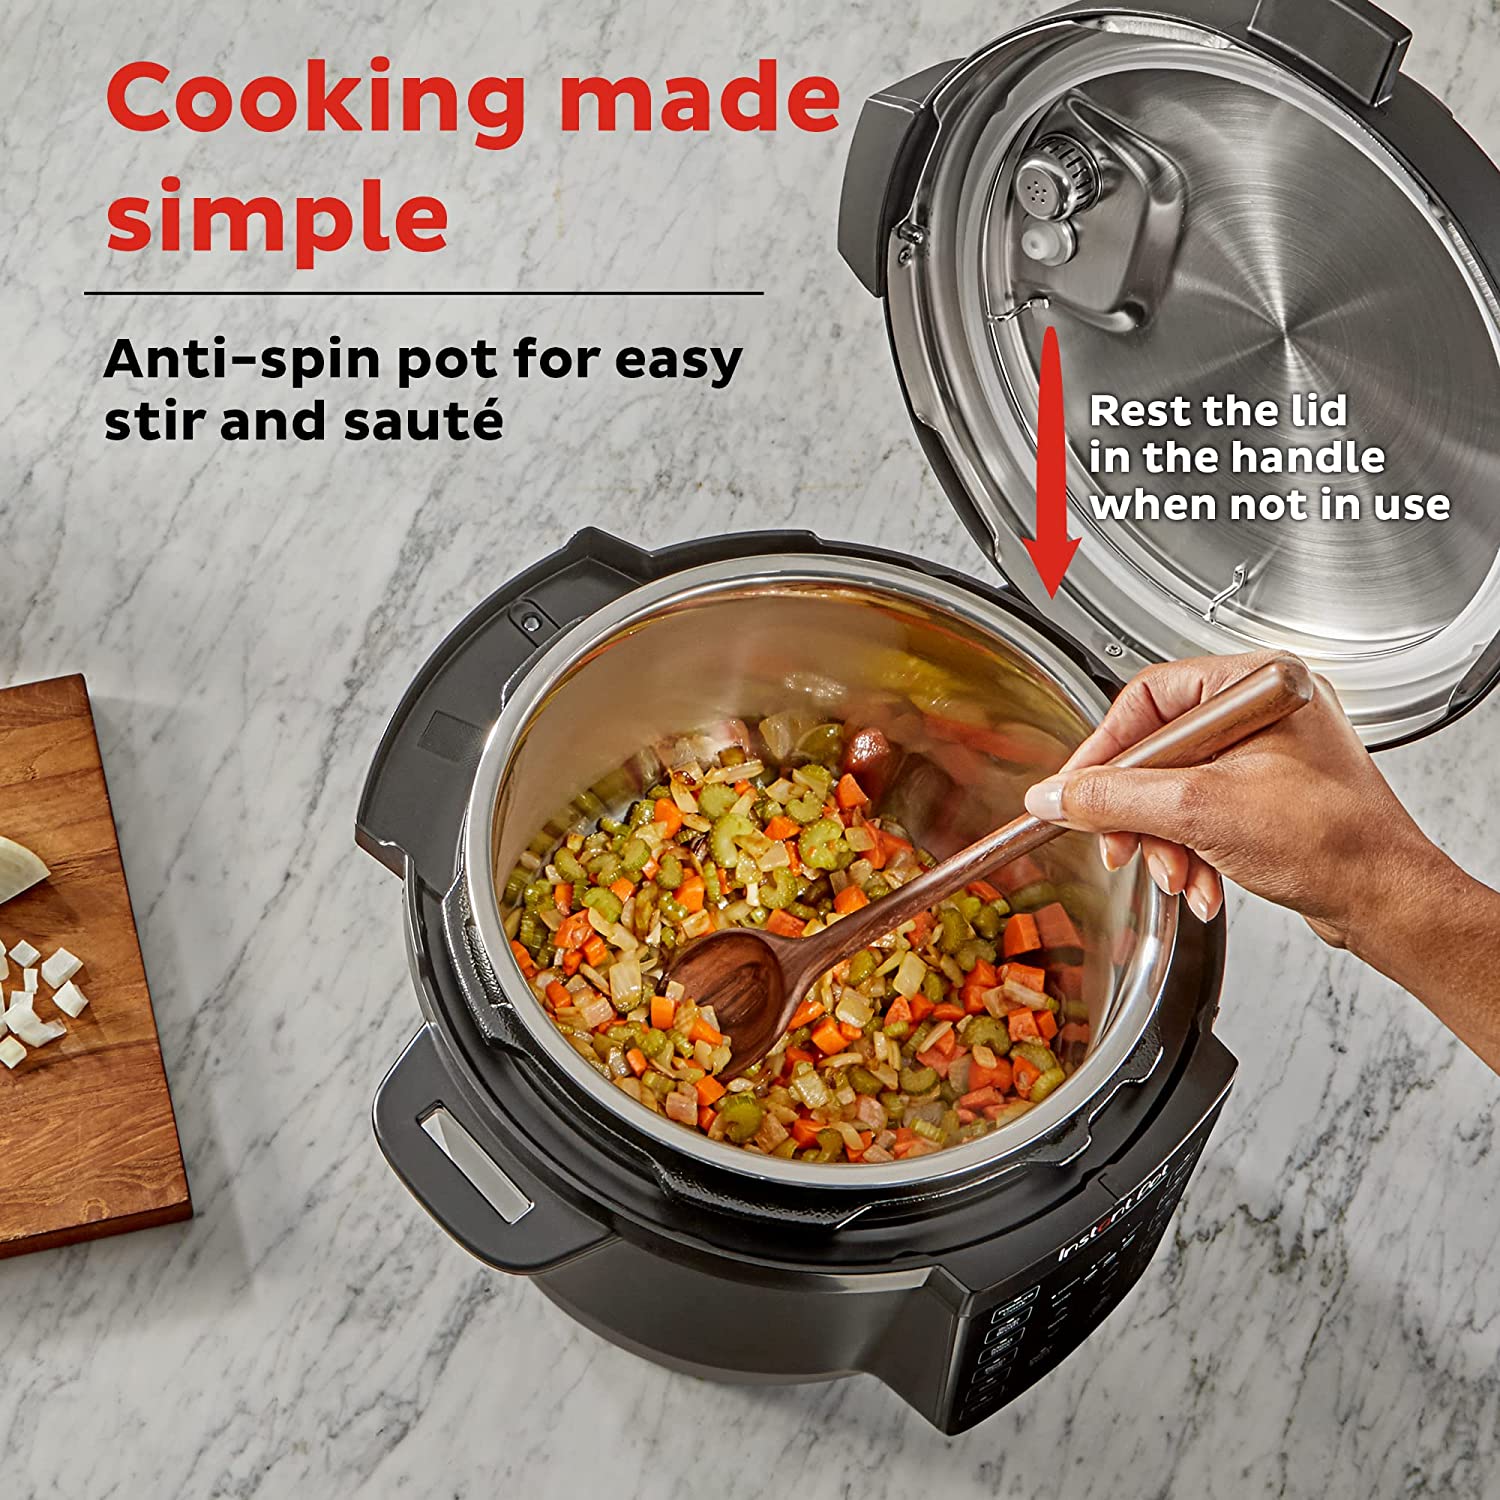 https://bigbigmart.com/wp-content/uploads/2023/07/Instant-Pot-RIO-Formerly-Known-as-Duo-7-in-1-Electric-Multi-Cooker-Pressure-Cooker-Slow-Cooker-Rice-Cooker-Steamer-Saute-Yogurt-Maker-Warmer-Includes-App-With-Over-800-Recipes-6-Quart3.jpg